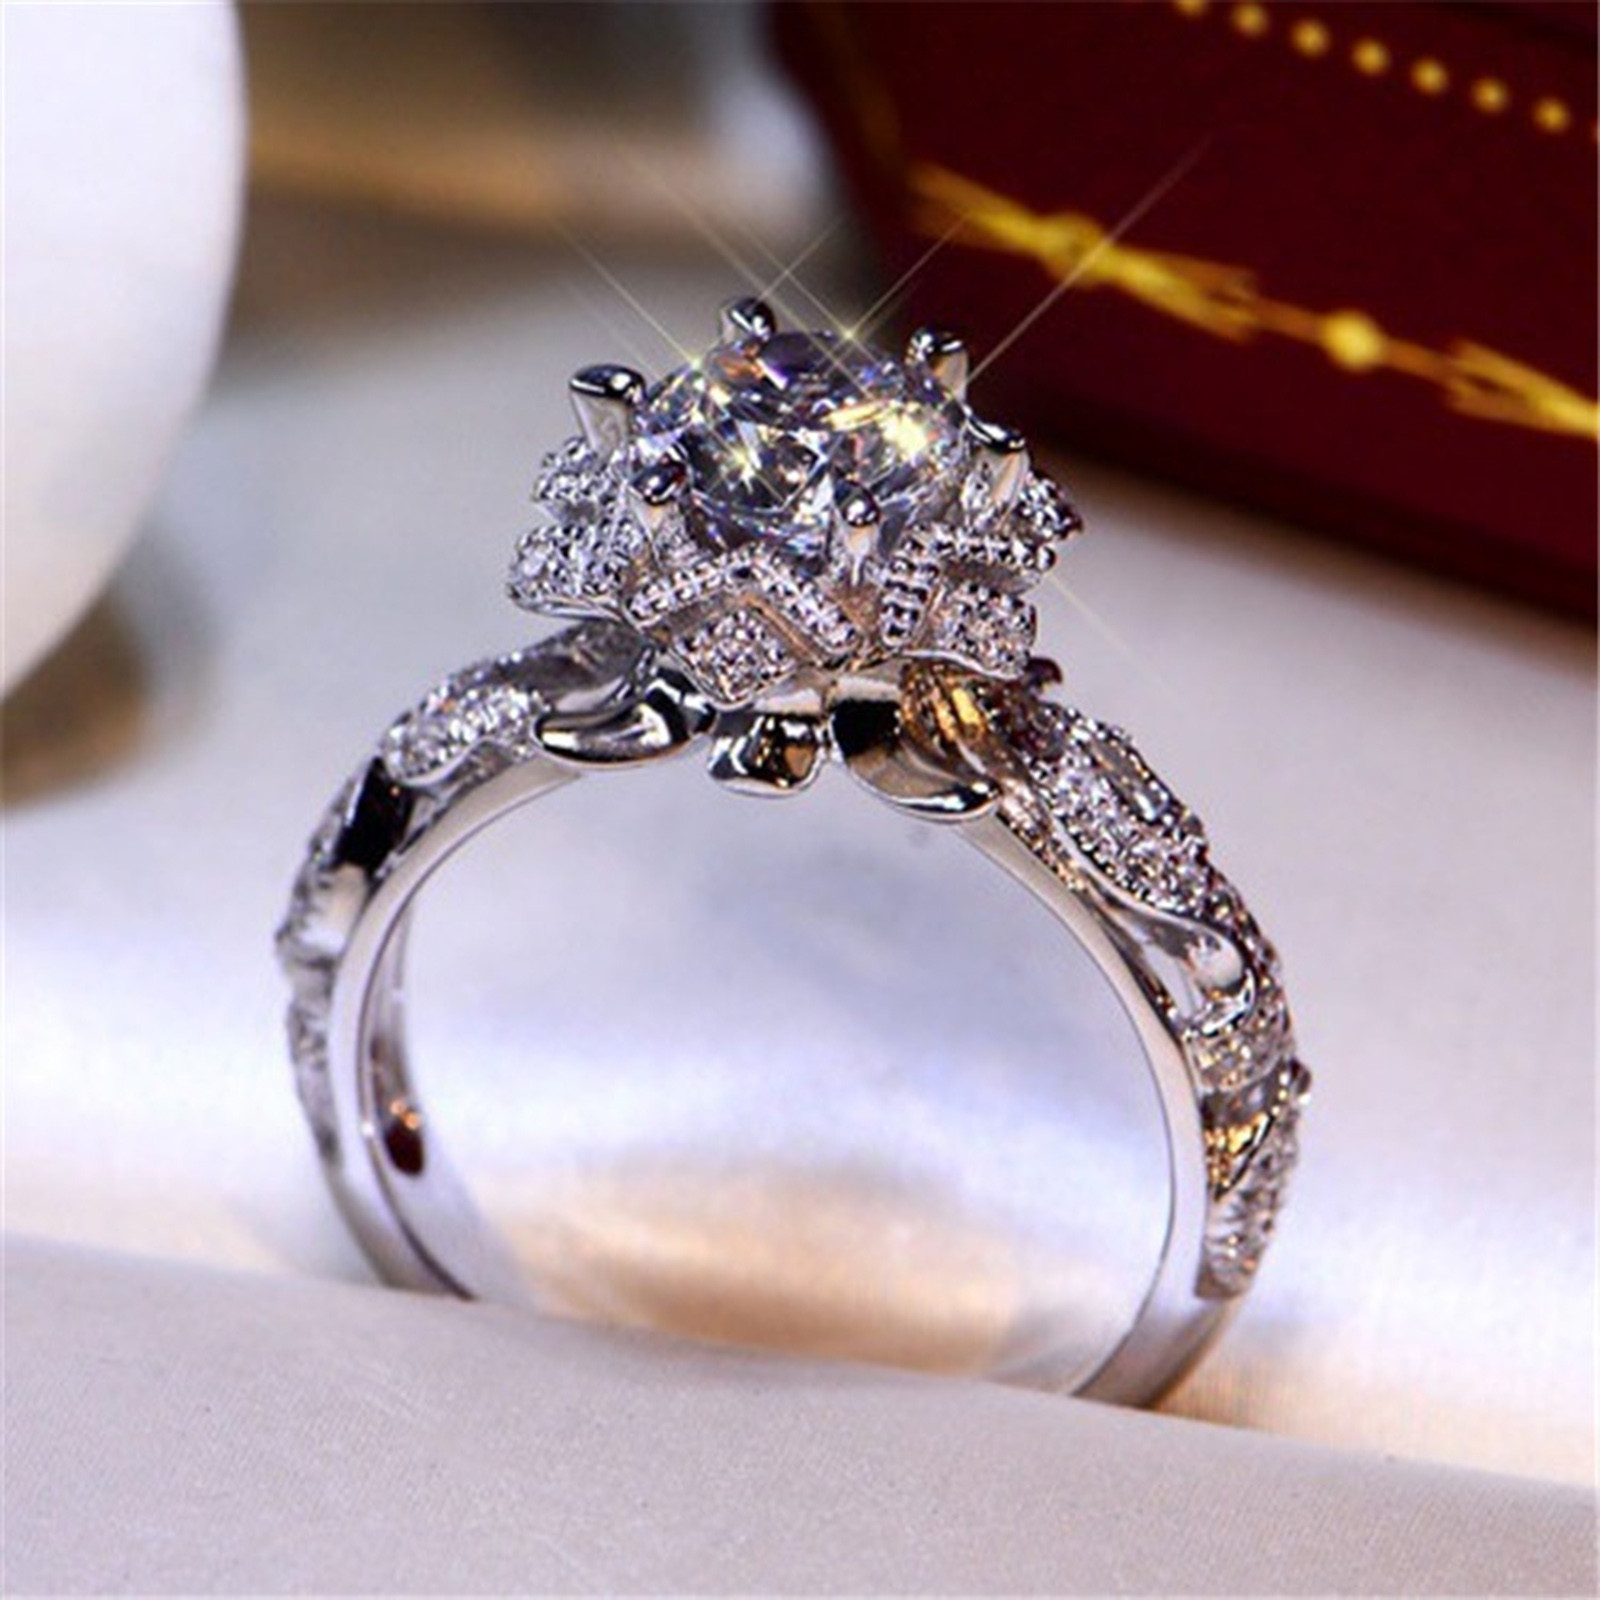 CFXNMZGR Rings For Women Exquisite Hollow Out Ring Women Engagement Wedding Jewelry Accessories Gift - image 3 of 7